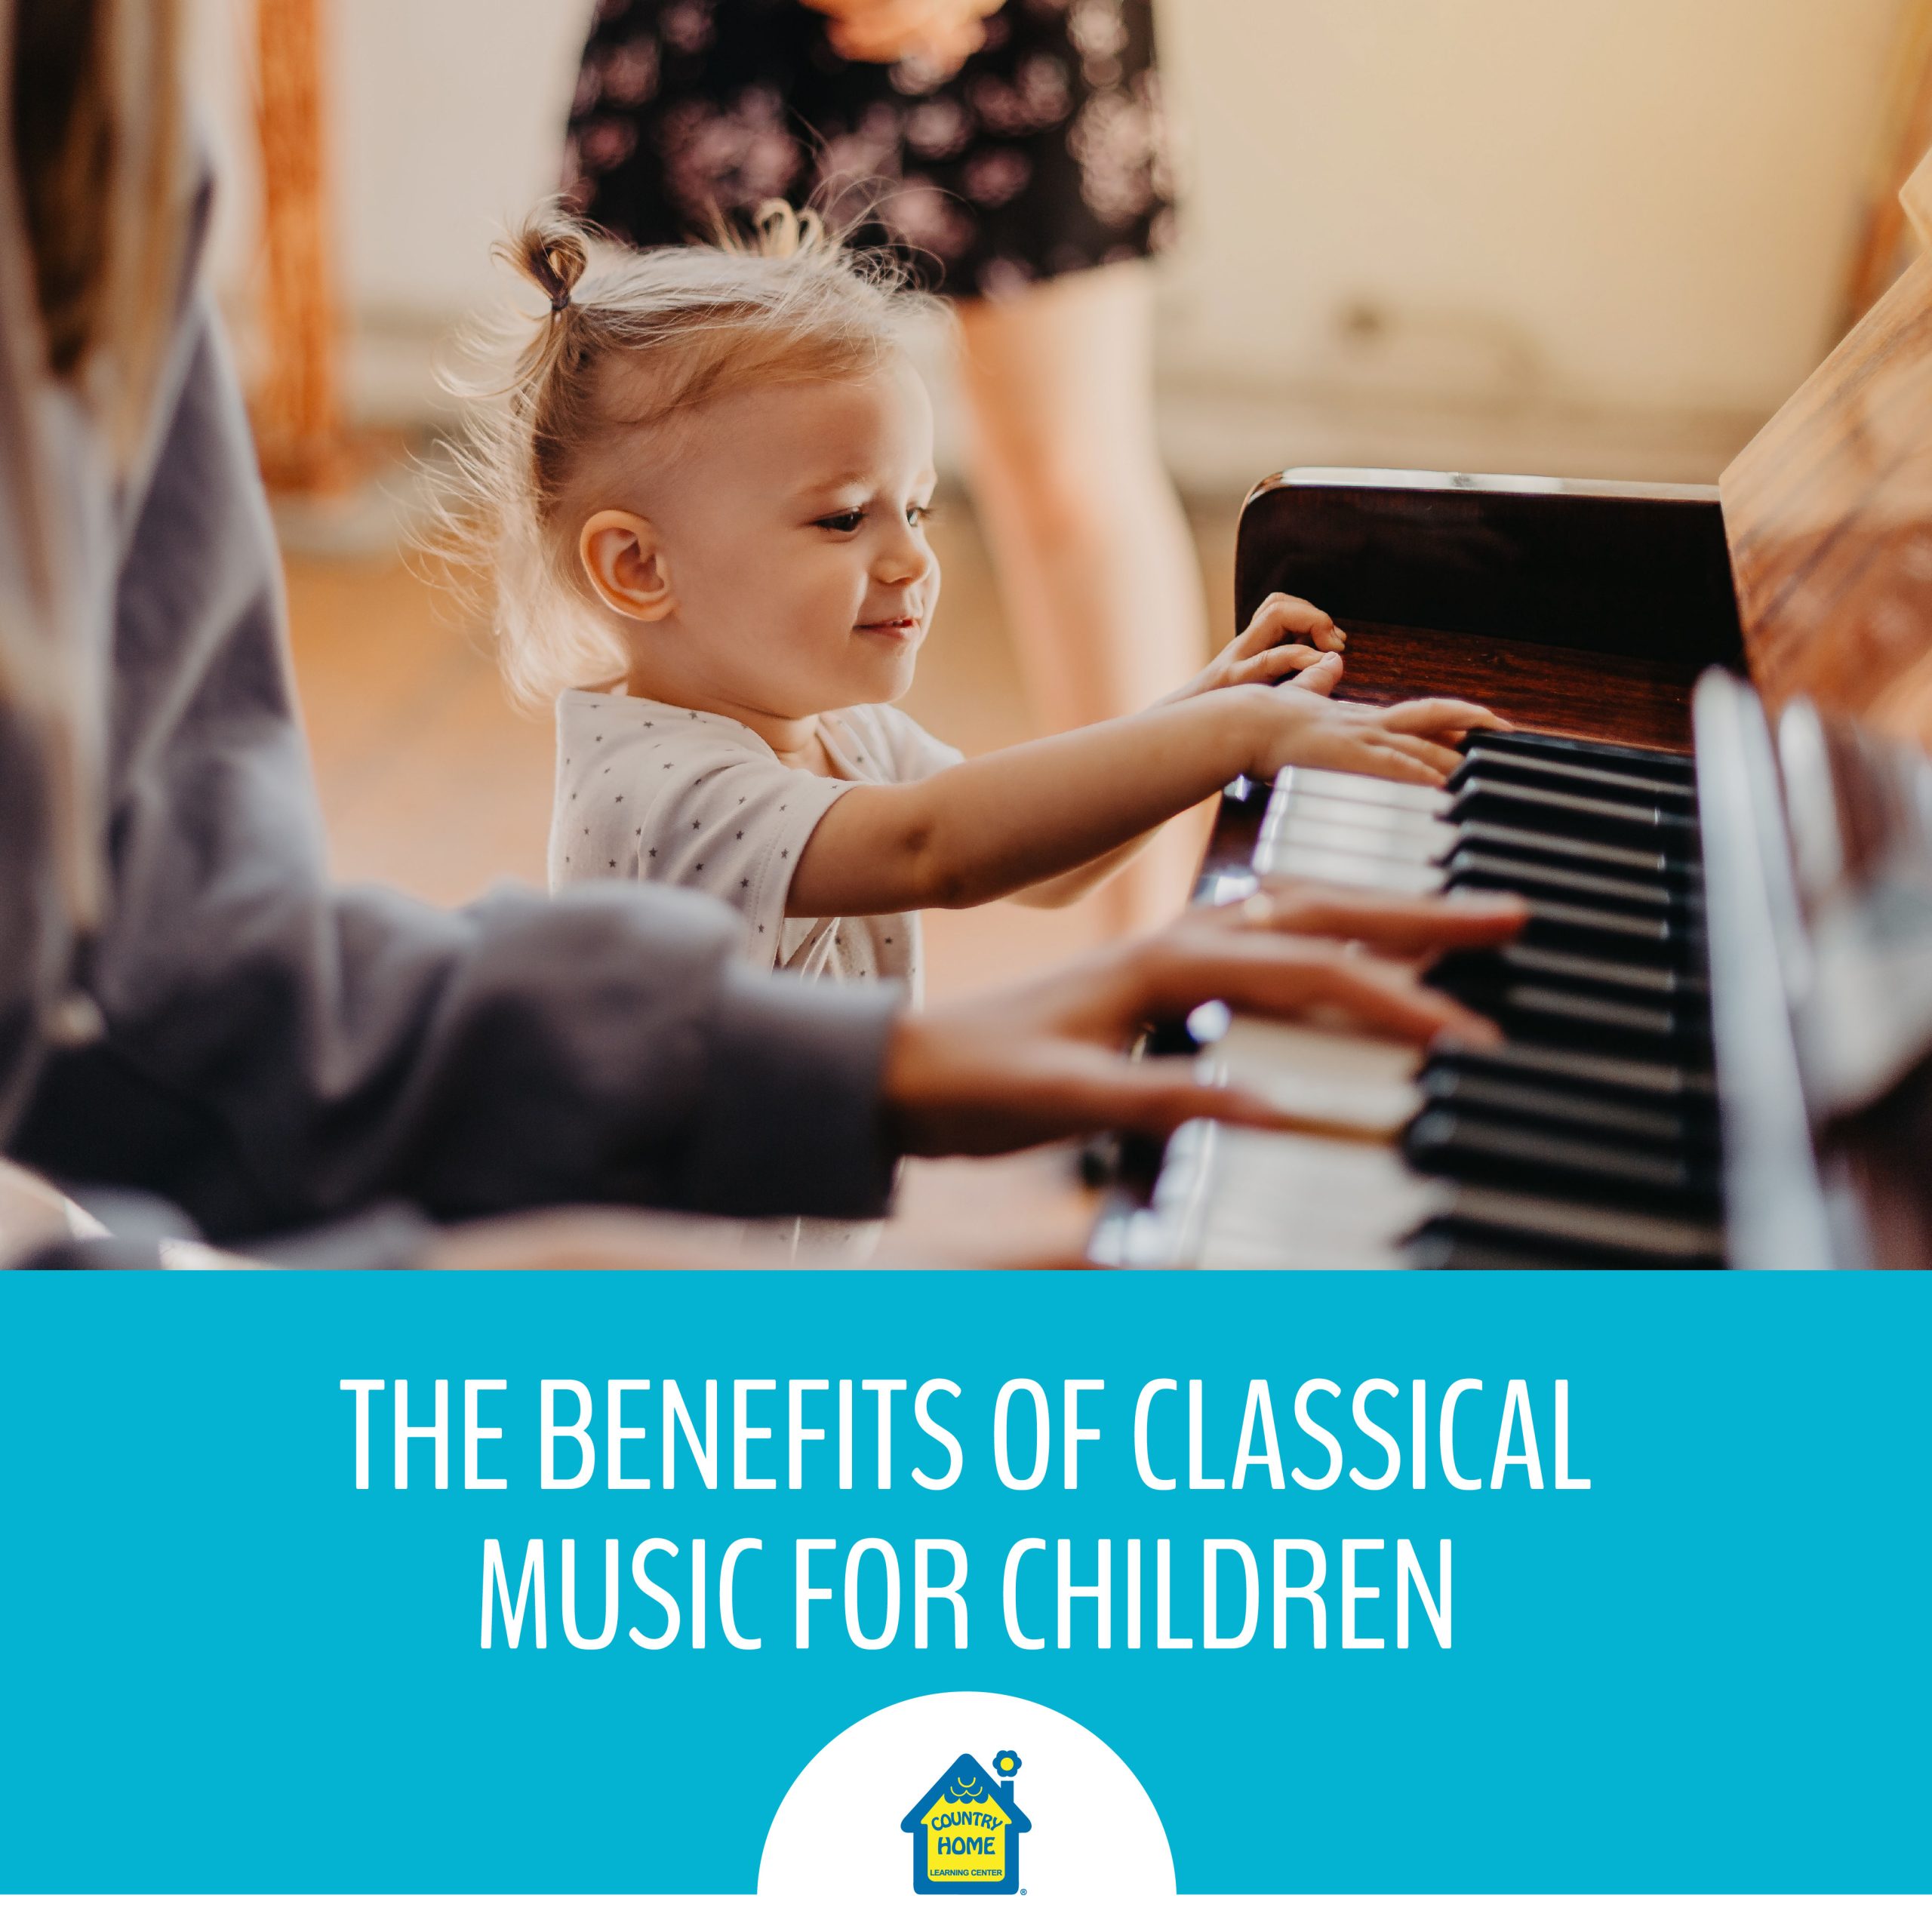 The Benefits of Classical Music for Children